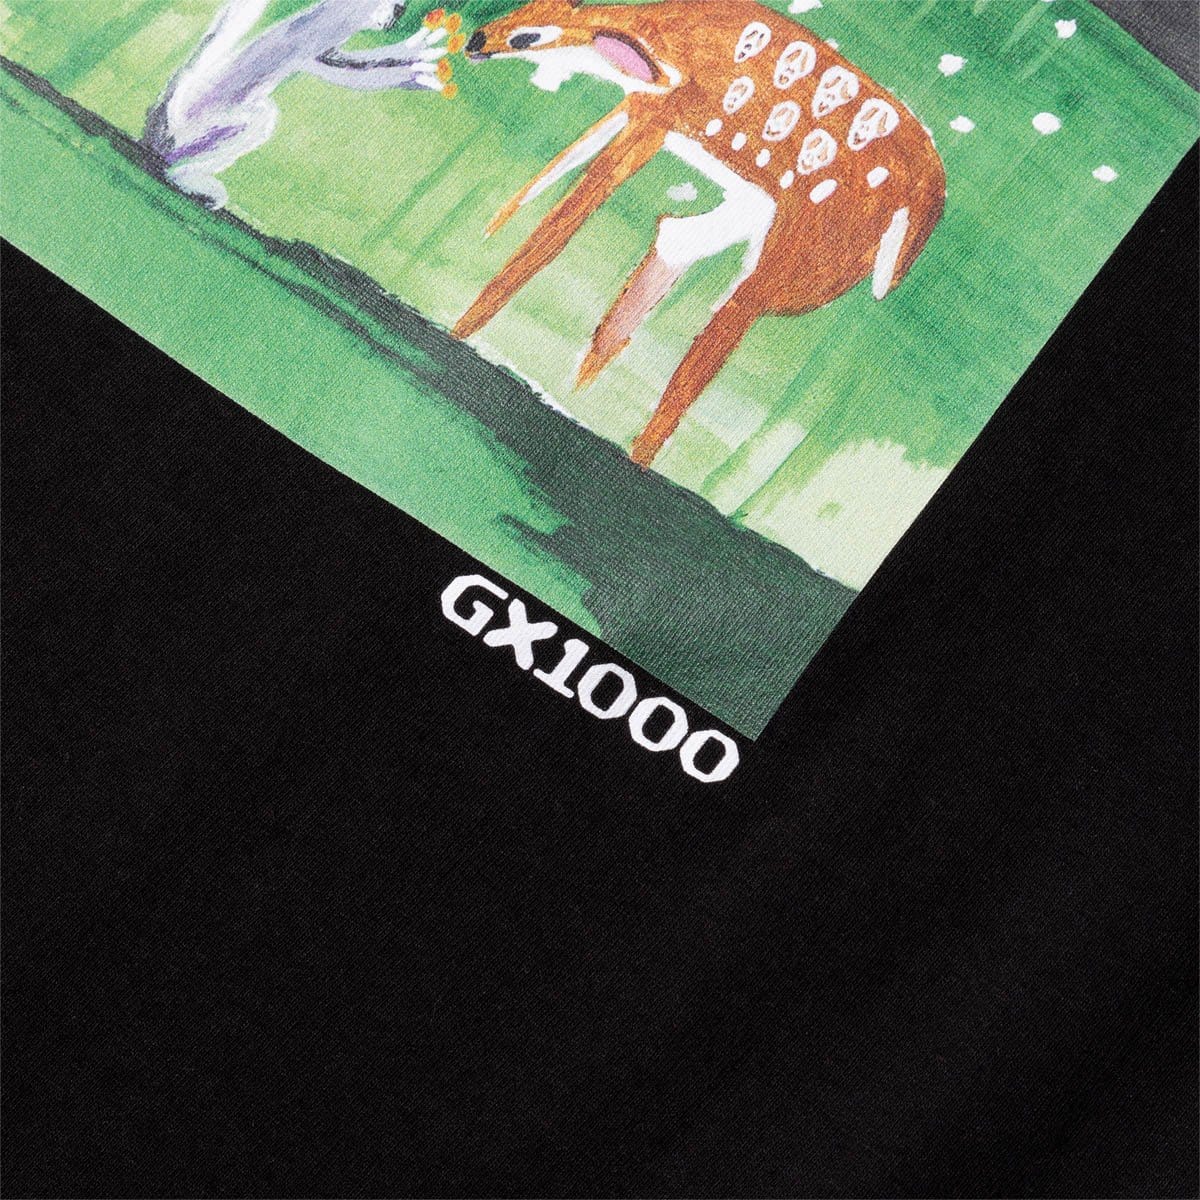 GX1000 T-Shirts SHARING WITH FRIENDS TEE